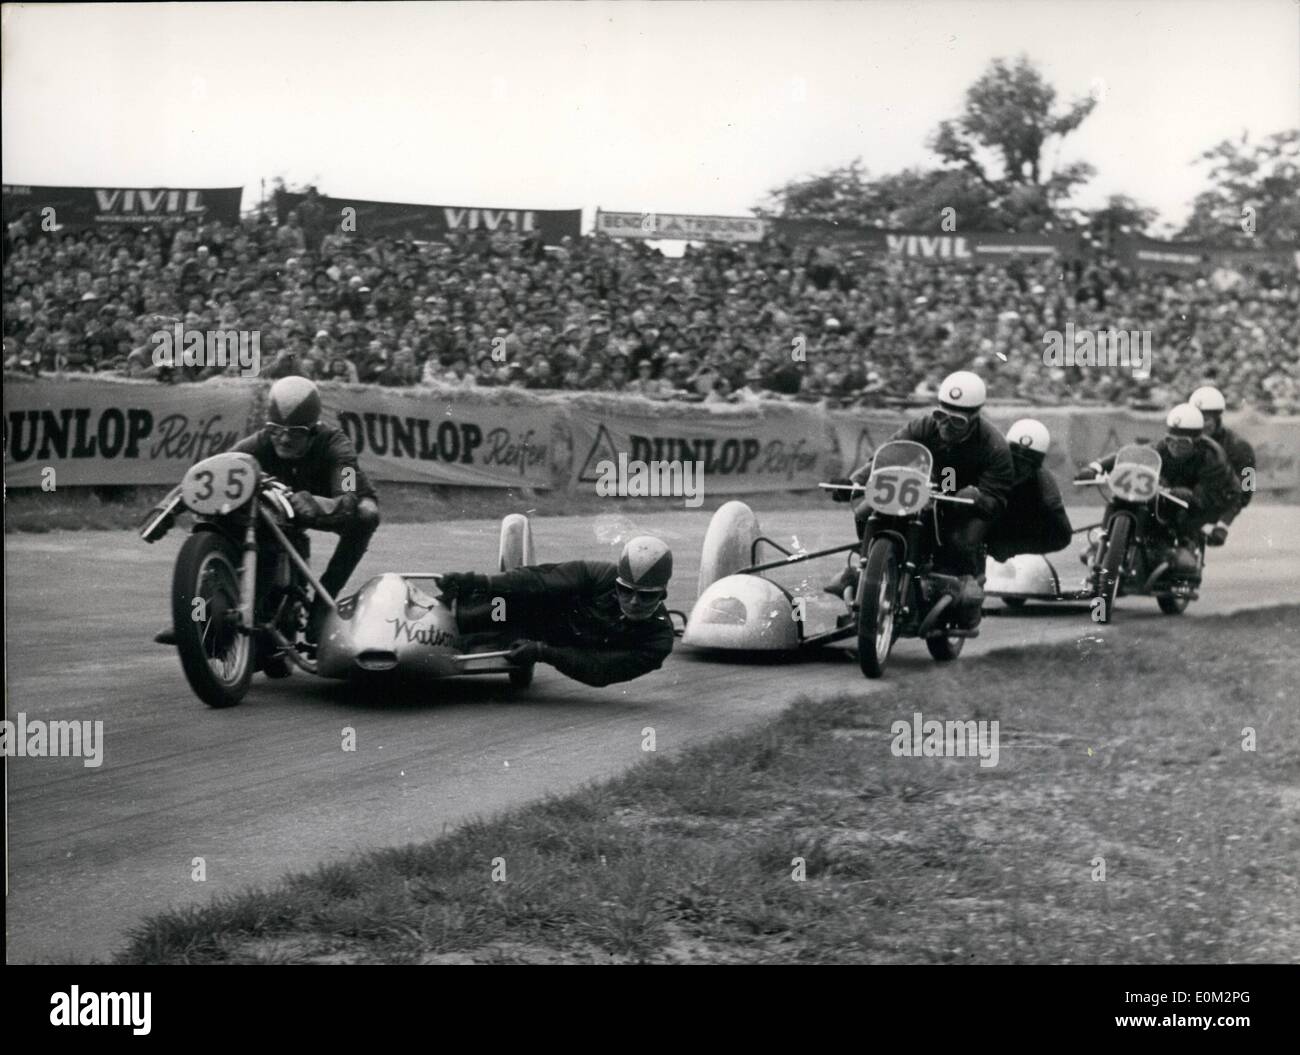 May 05, 1953 - The most interest race on Hockenheimring near Mannheim was the race of the 500 ccm sidecar-motorcycles. The Englishman Eric Oliver (left) won with the breath of a tire before Wiggerl Kraus (Munich) (middle). Third was Noll (right) Stock Photo